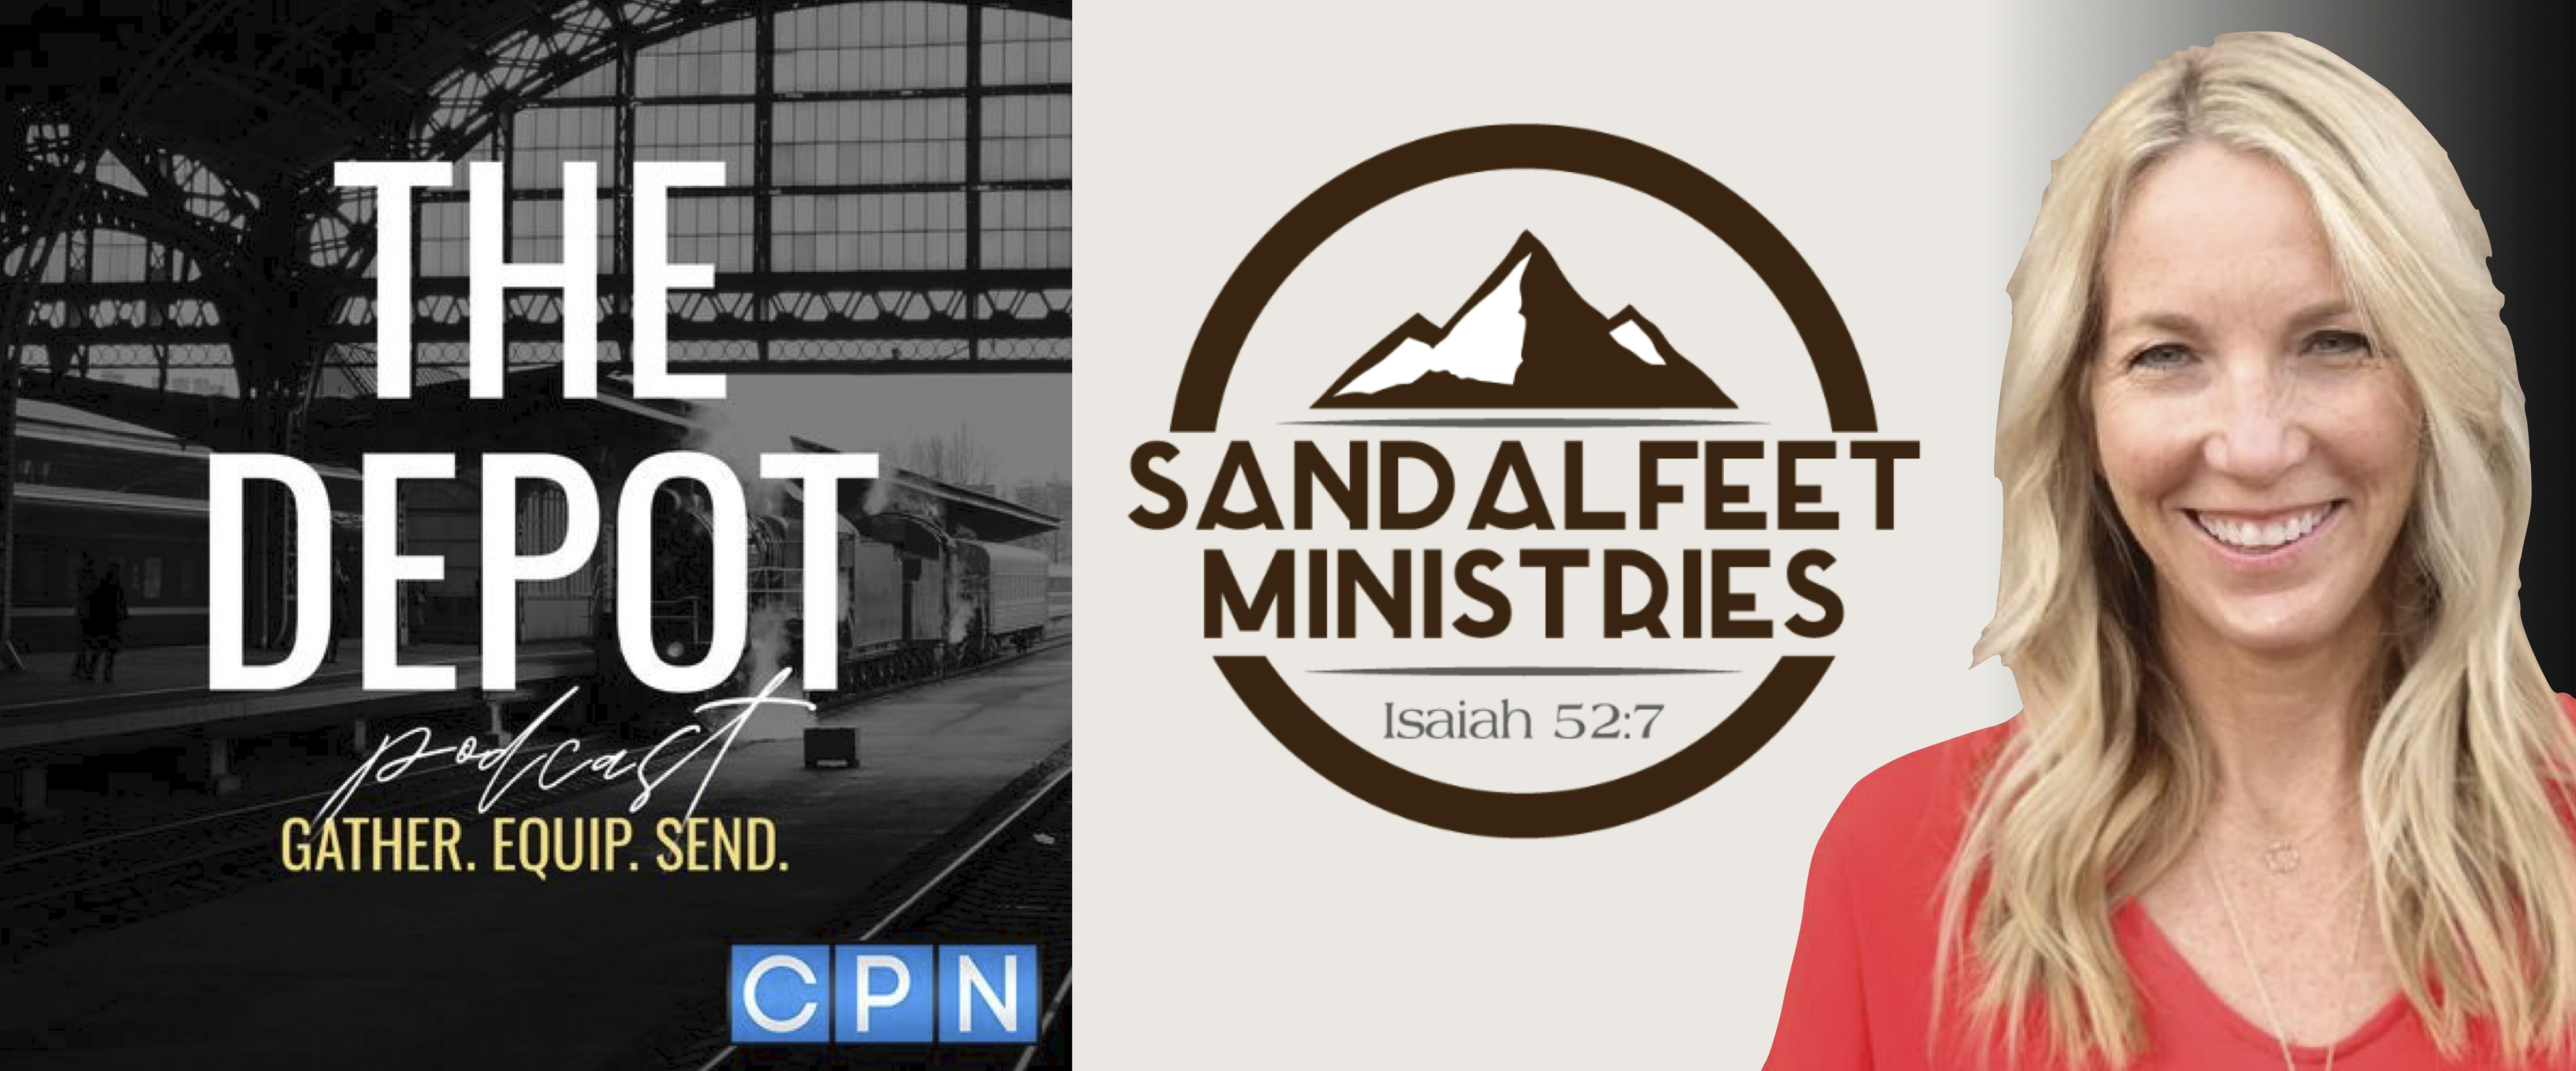 THE DEPOT PODCAST: How Do You Navigate Operating a Small Business and Social Media as a Christian? - with Crystal Buck